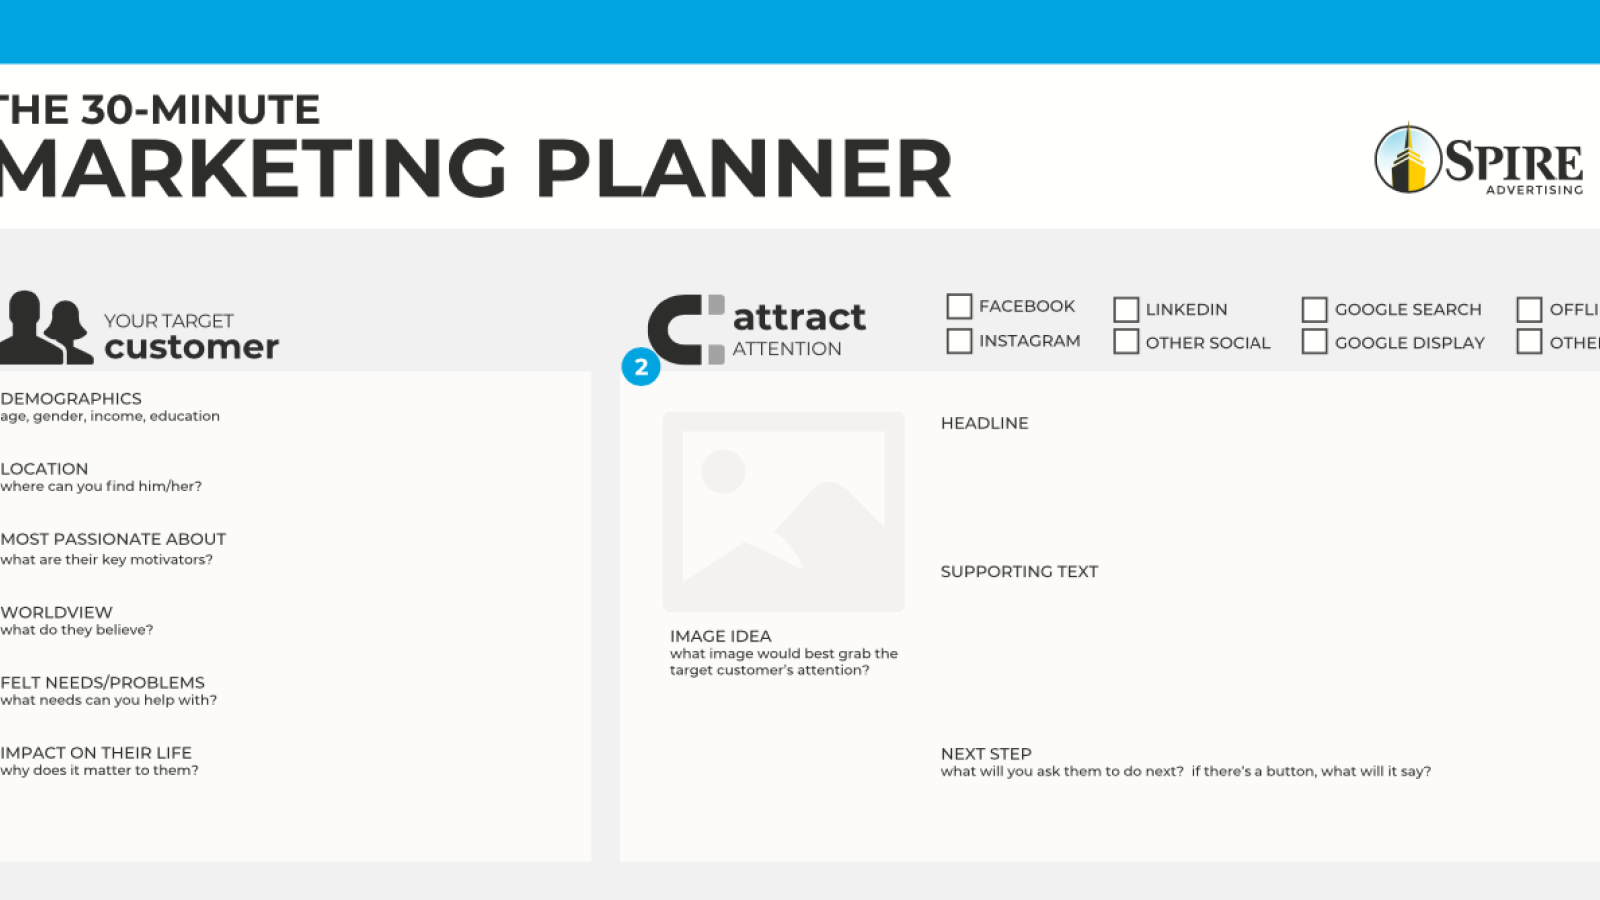 The "30-Second Marketing Planner" provides you an outline to plan out your marketing strategy from your target market to how you will capture leads.